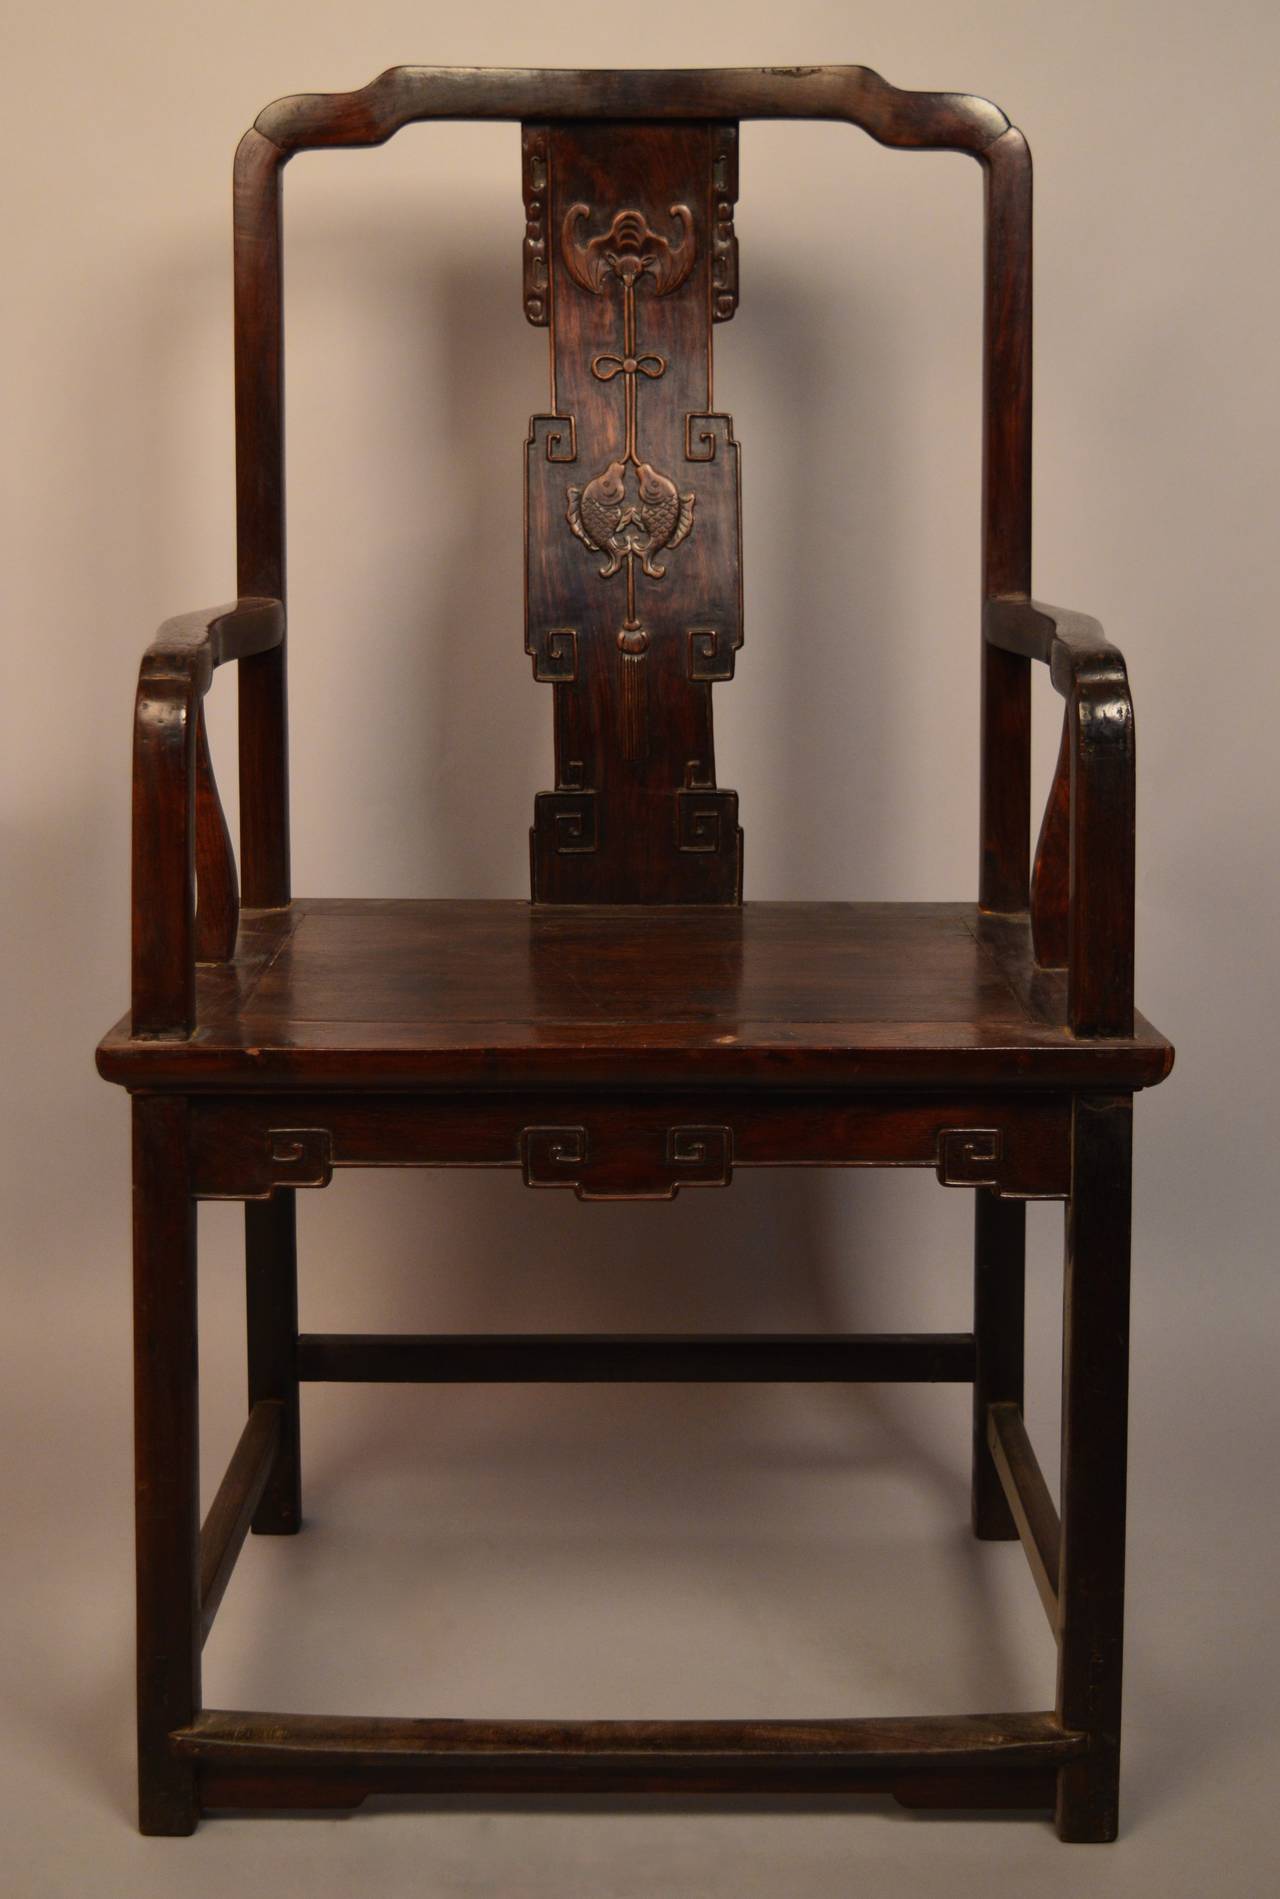 19th century Chinese armchair having a back splat carved with two important Chinese symbols; the bat 